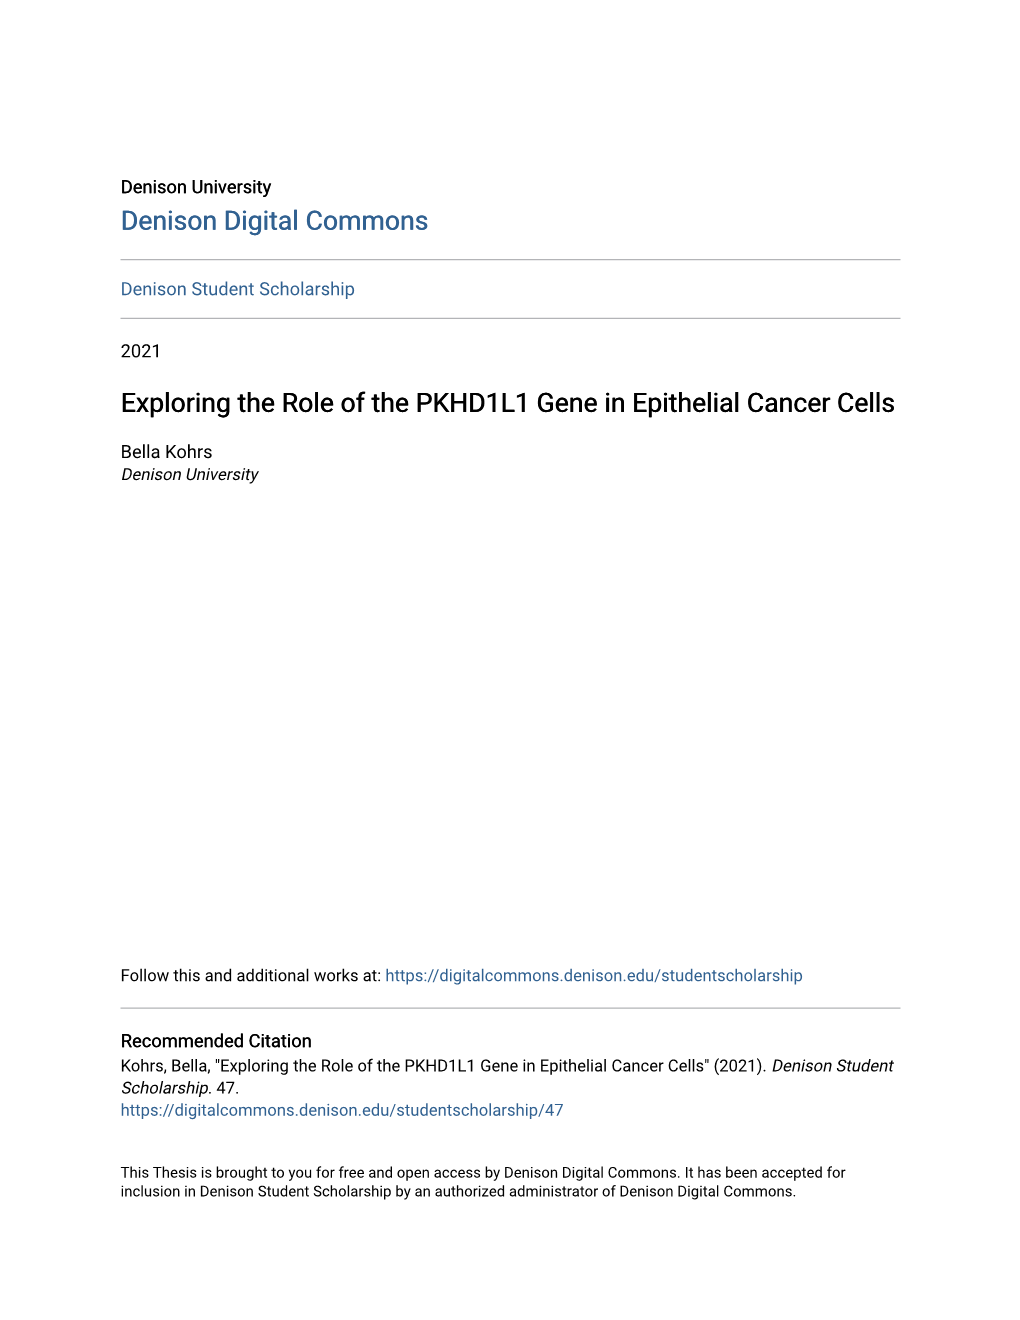 Exploring the Role of the PKHD1L1 Gene in Epithelial Cancer Cells